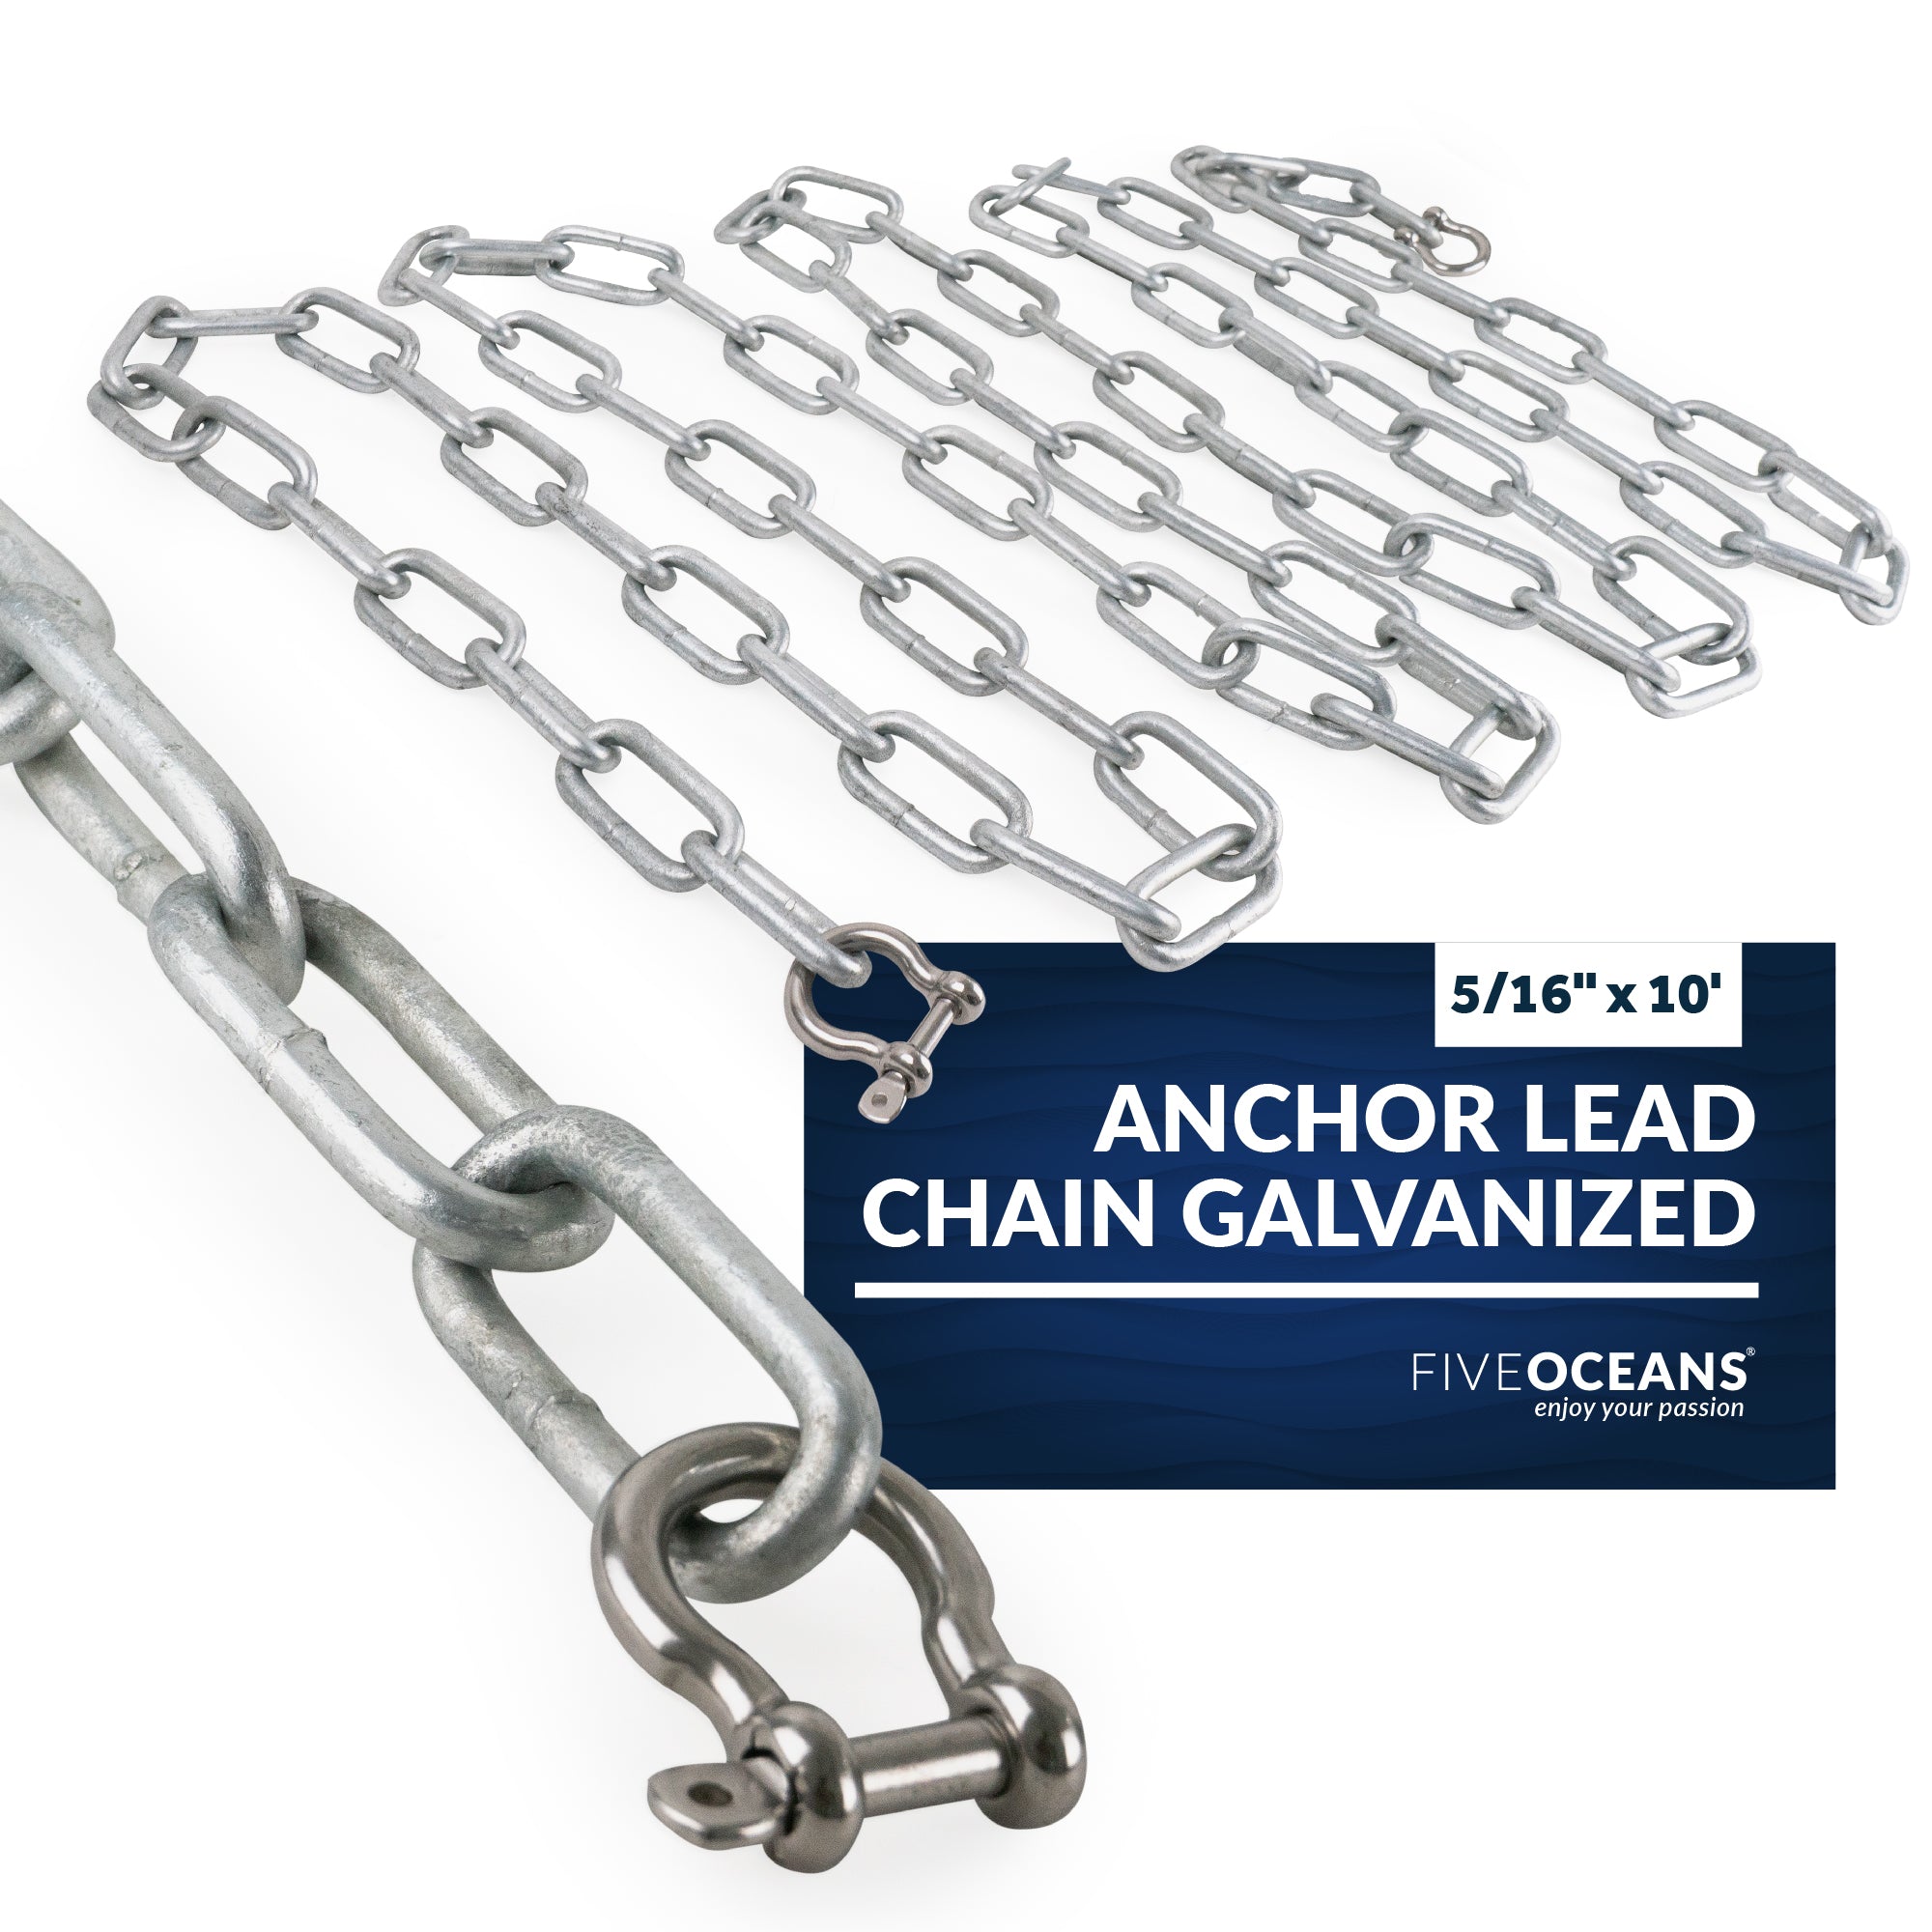 Boat Anchor Lead Chain with Shackles, 5/16 inches x 10 Feet Hot-Dipped Galvanized Steel with 2 AISI316 Stainless Steel 5/16 inches Bow Shackles FO4569-GN10